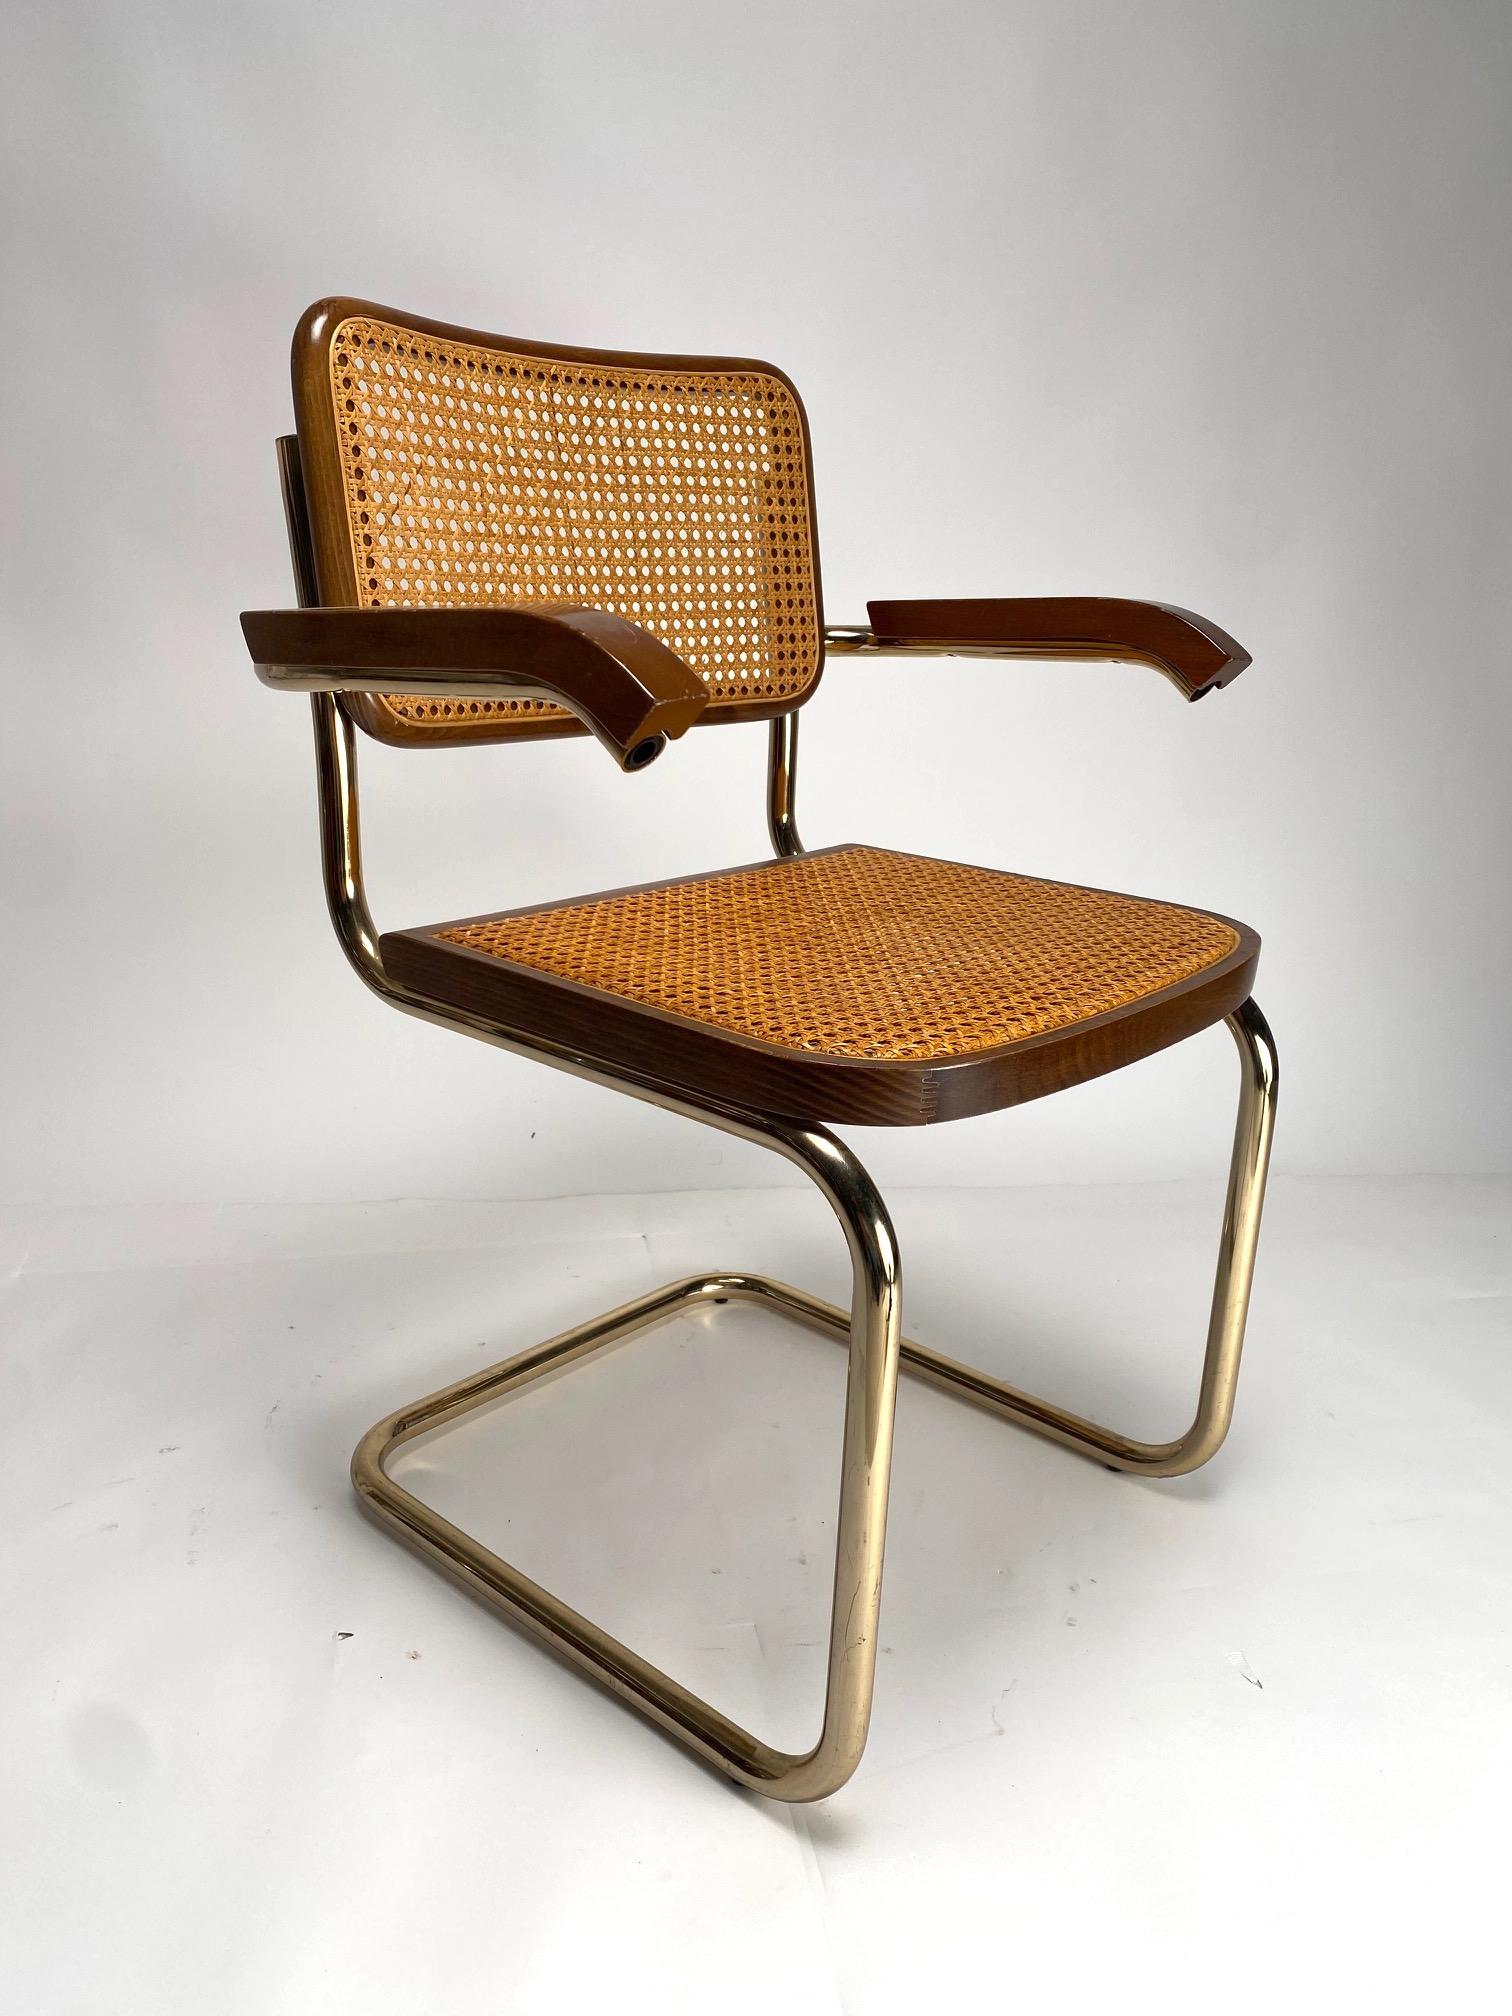 Set of 4 dining chairs Style B32 by Marcel Breuer, in metal, wood and rattan.